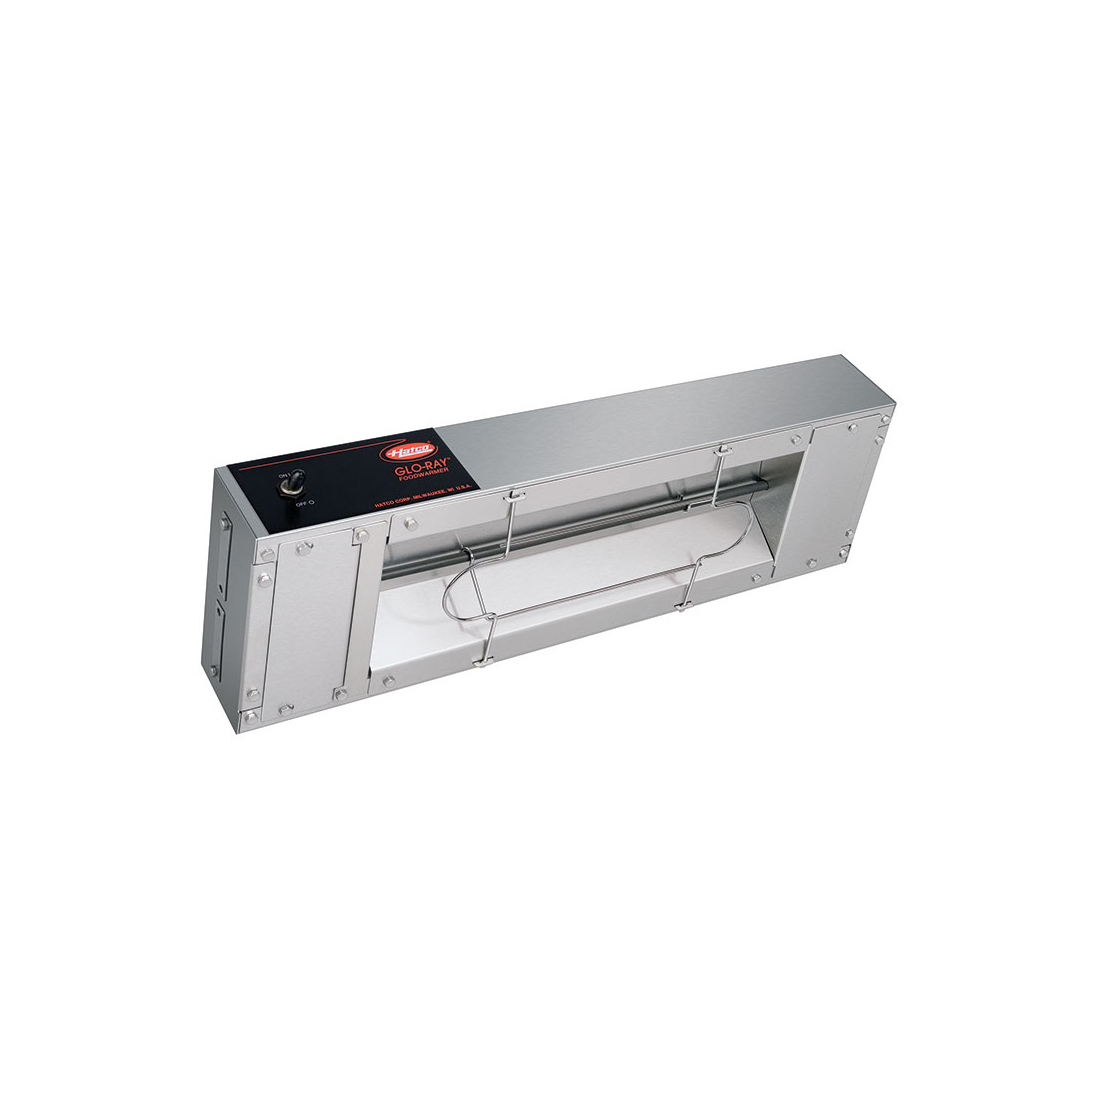 Hatco GRAH-24 Consistent Hold Infrared Heater|mkayn|مكاين